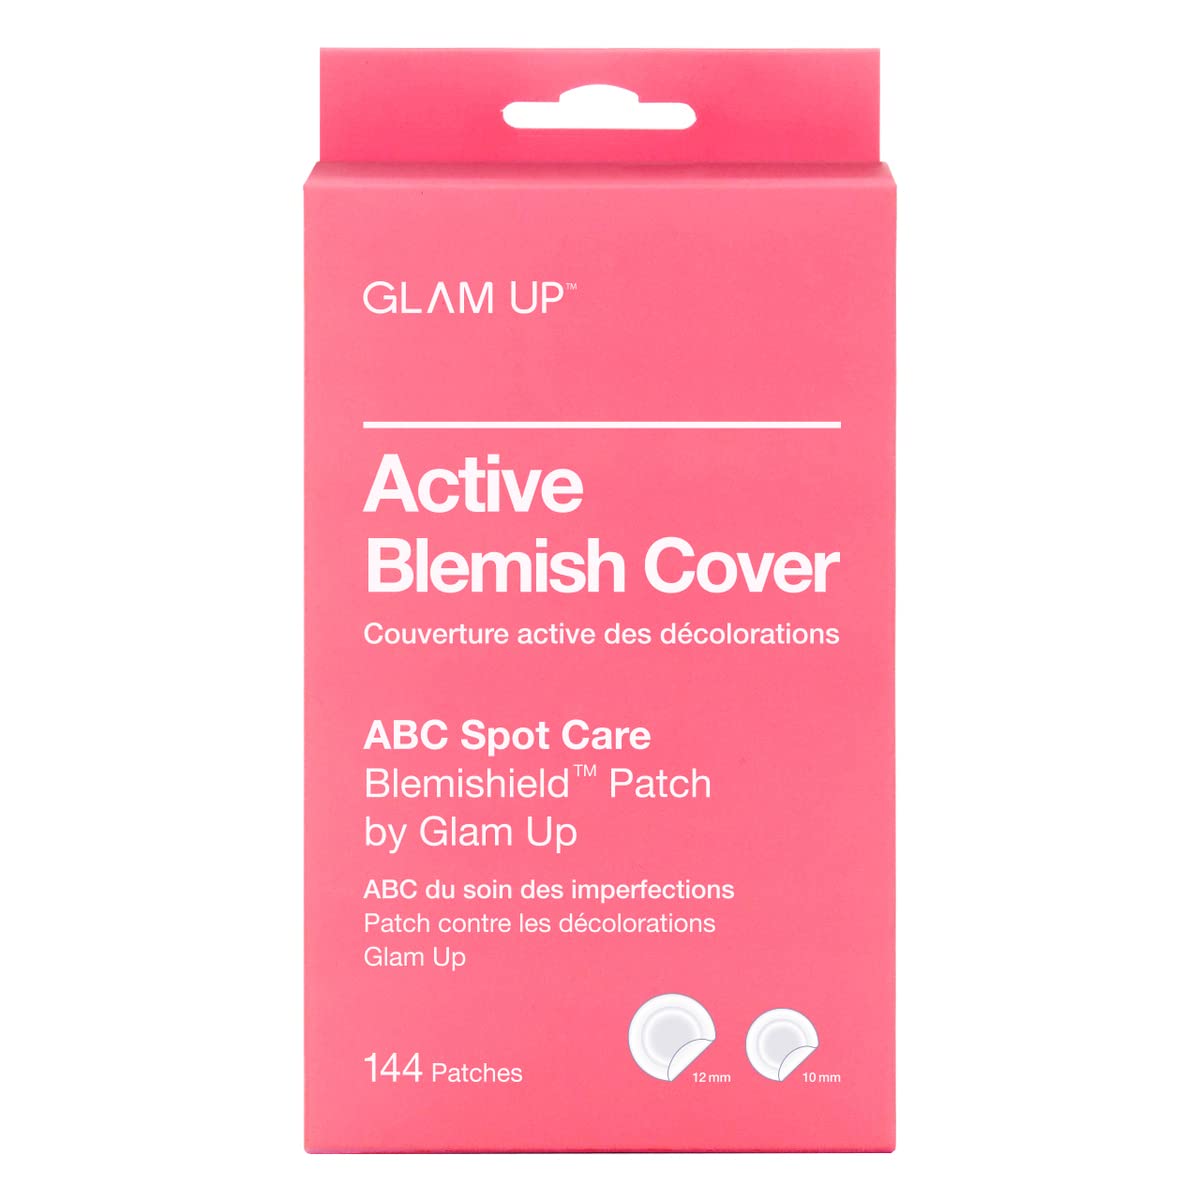 GLAM UP Hydrocolloid Blemish Pimple Zit Patches - Invisible Ultra Thin Spot Cover Stickers for Face and Skin, Strong Water-proof and Adhesive Overnight, Vegan-friendly (144 Count / 2 Sizes)